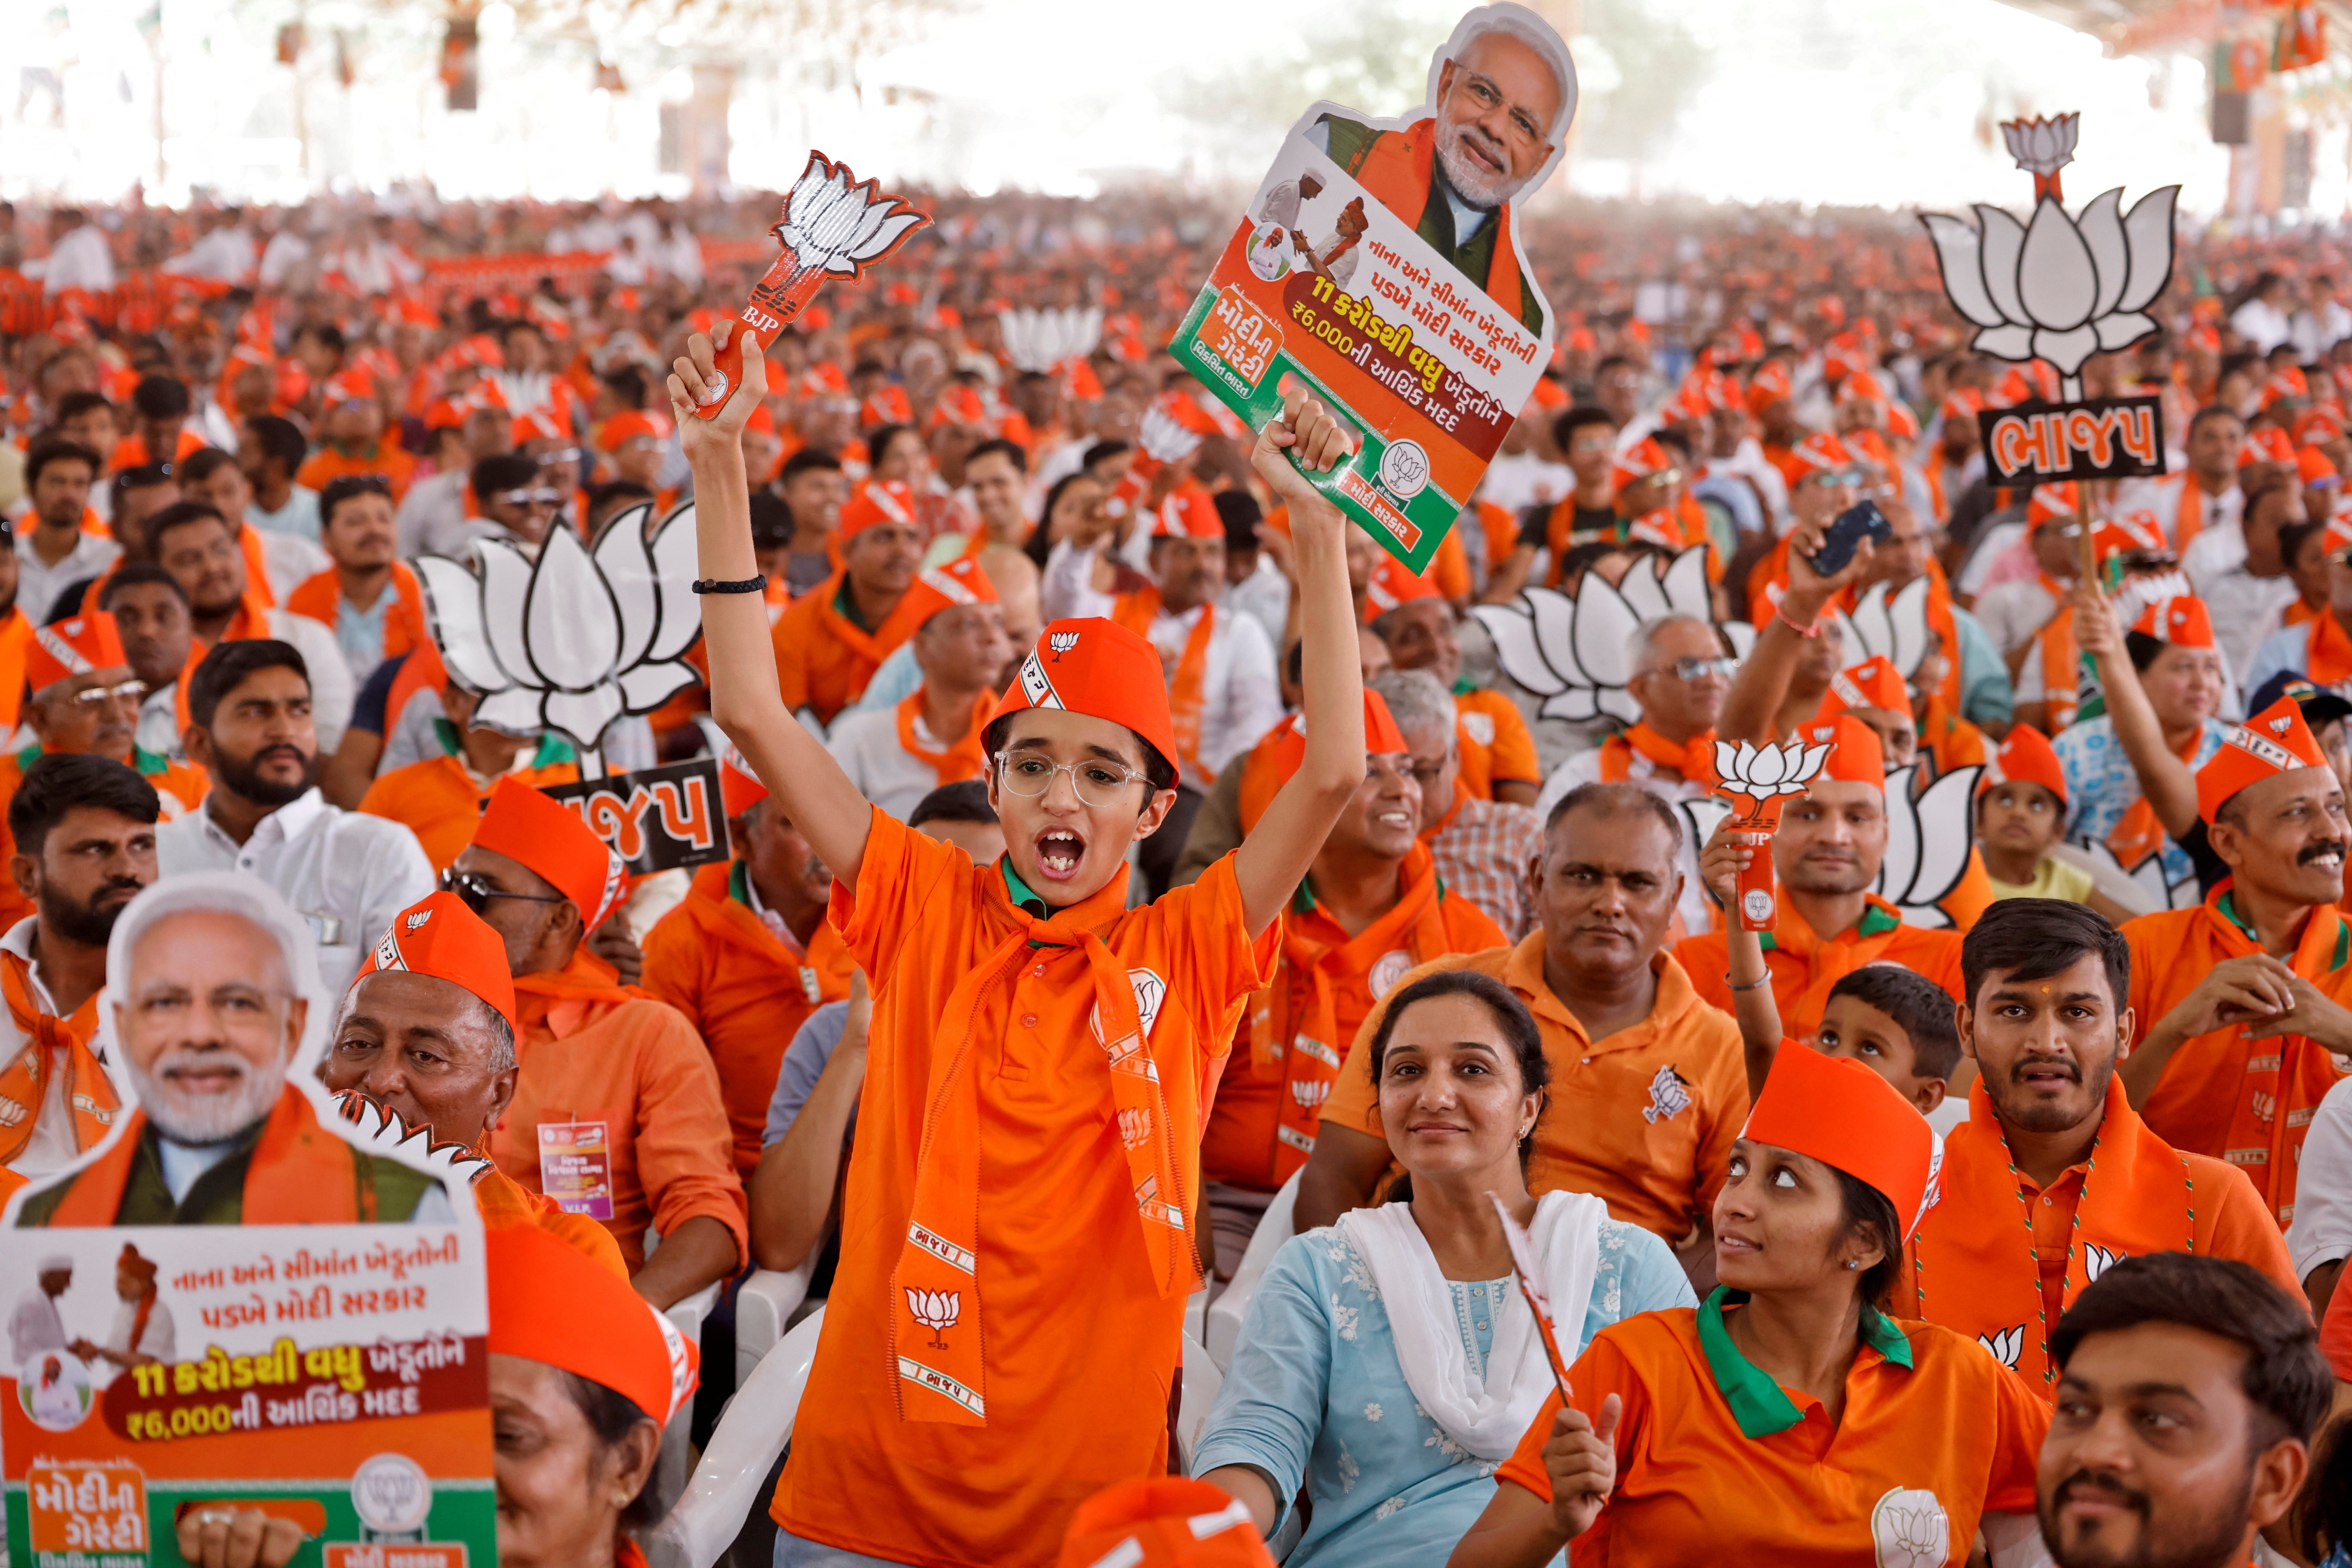 Supporters of prime minister Narendra Modi during an election campaign rally in Anand, Gujarat